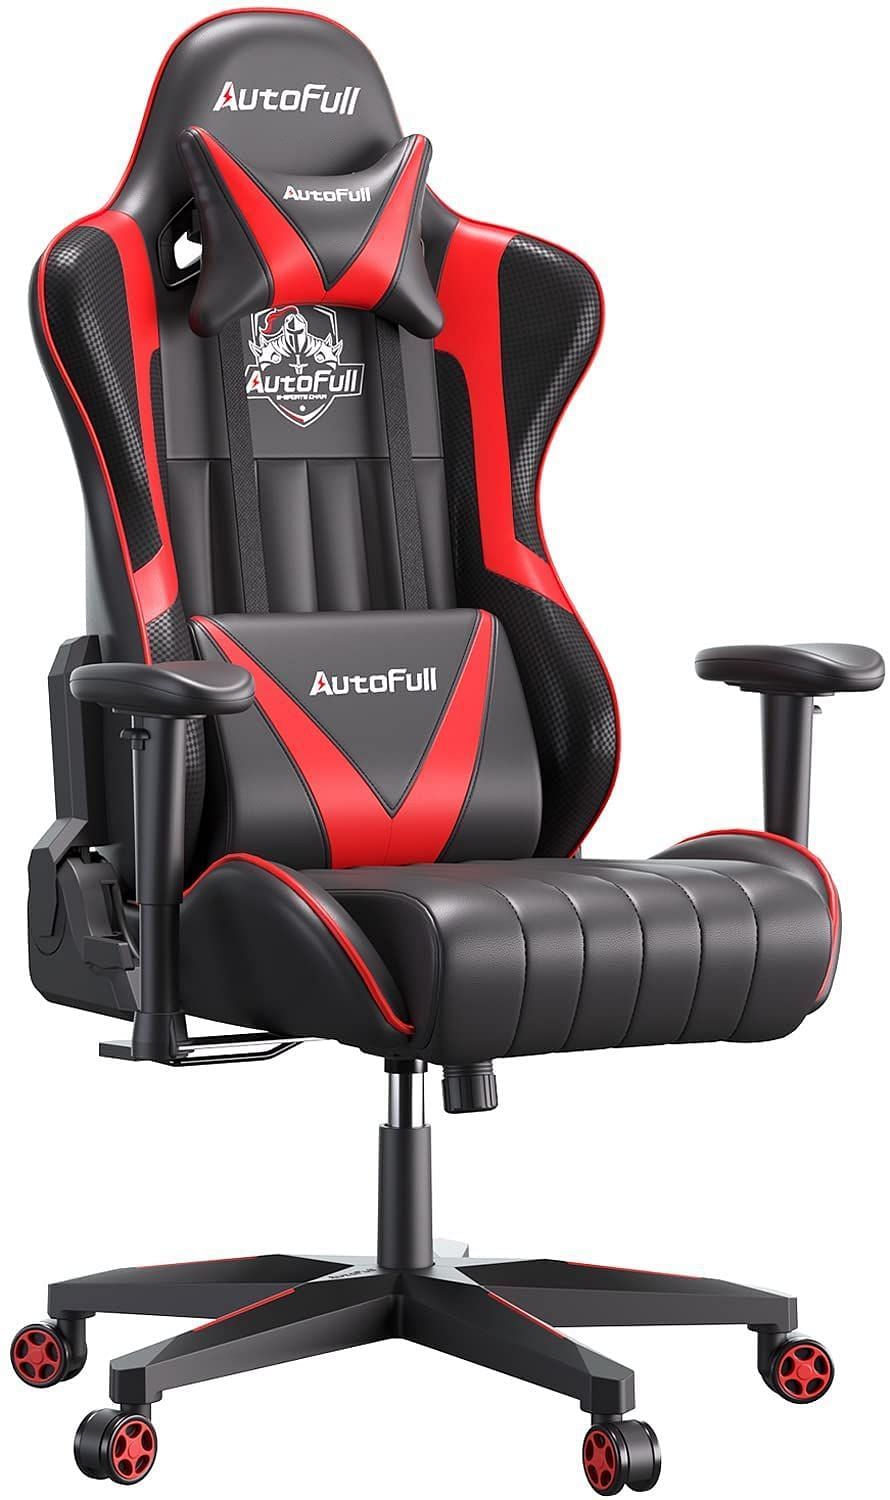 The chair is great for player who like to keep it simple (Image via Amazon)